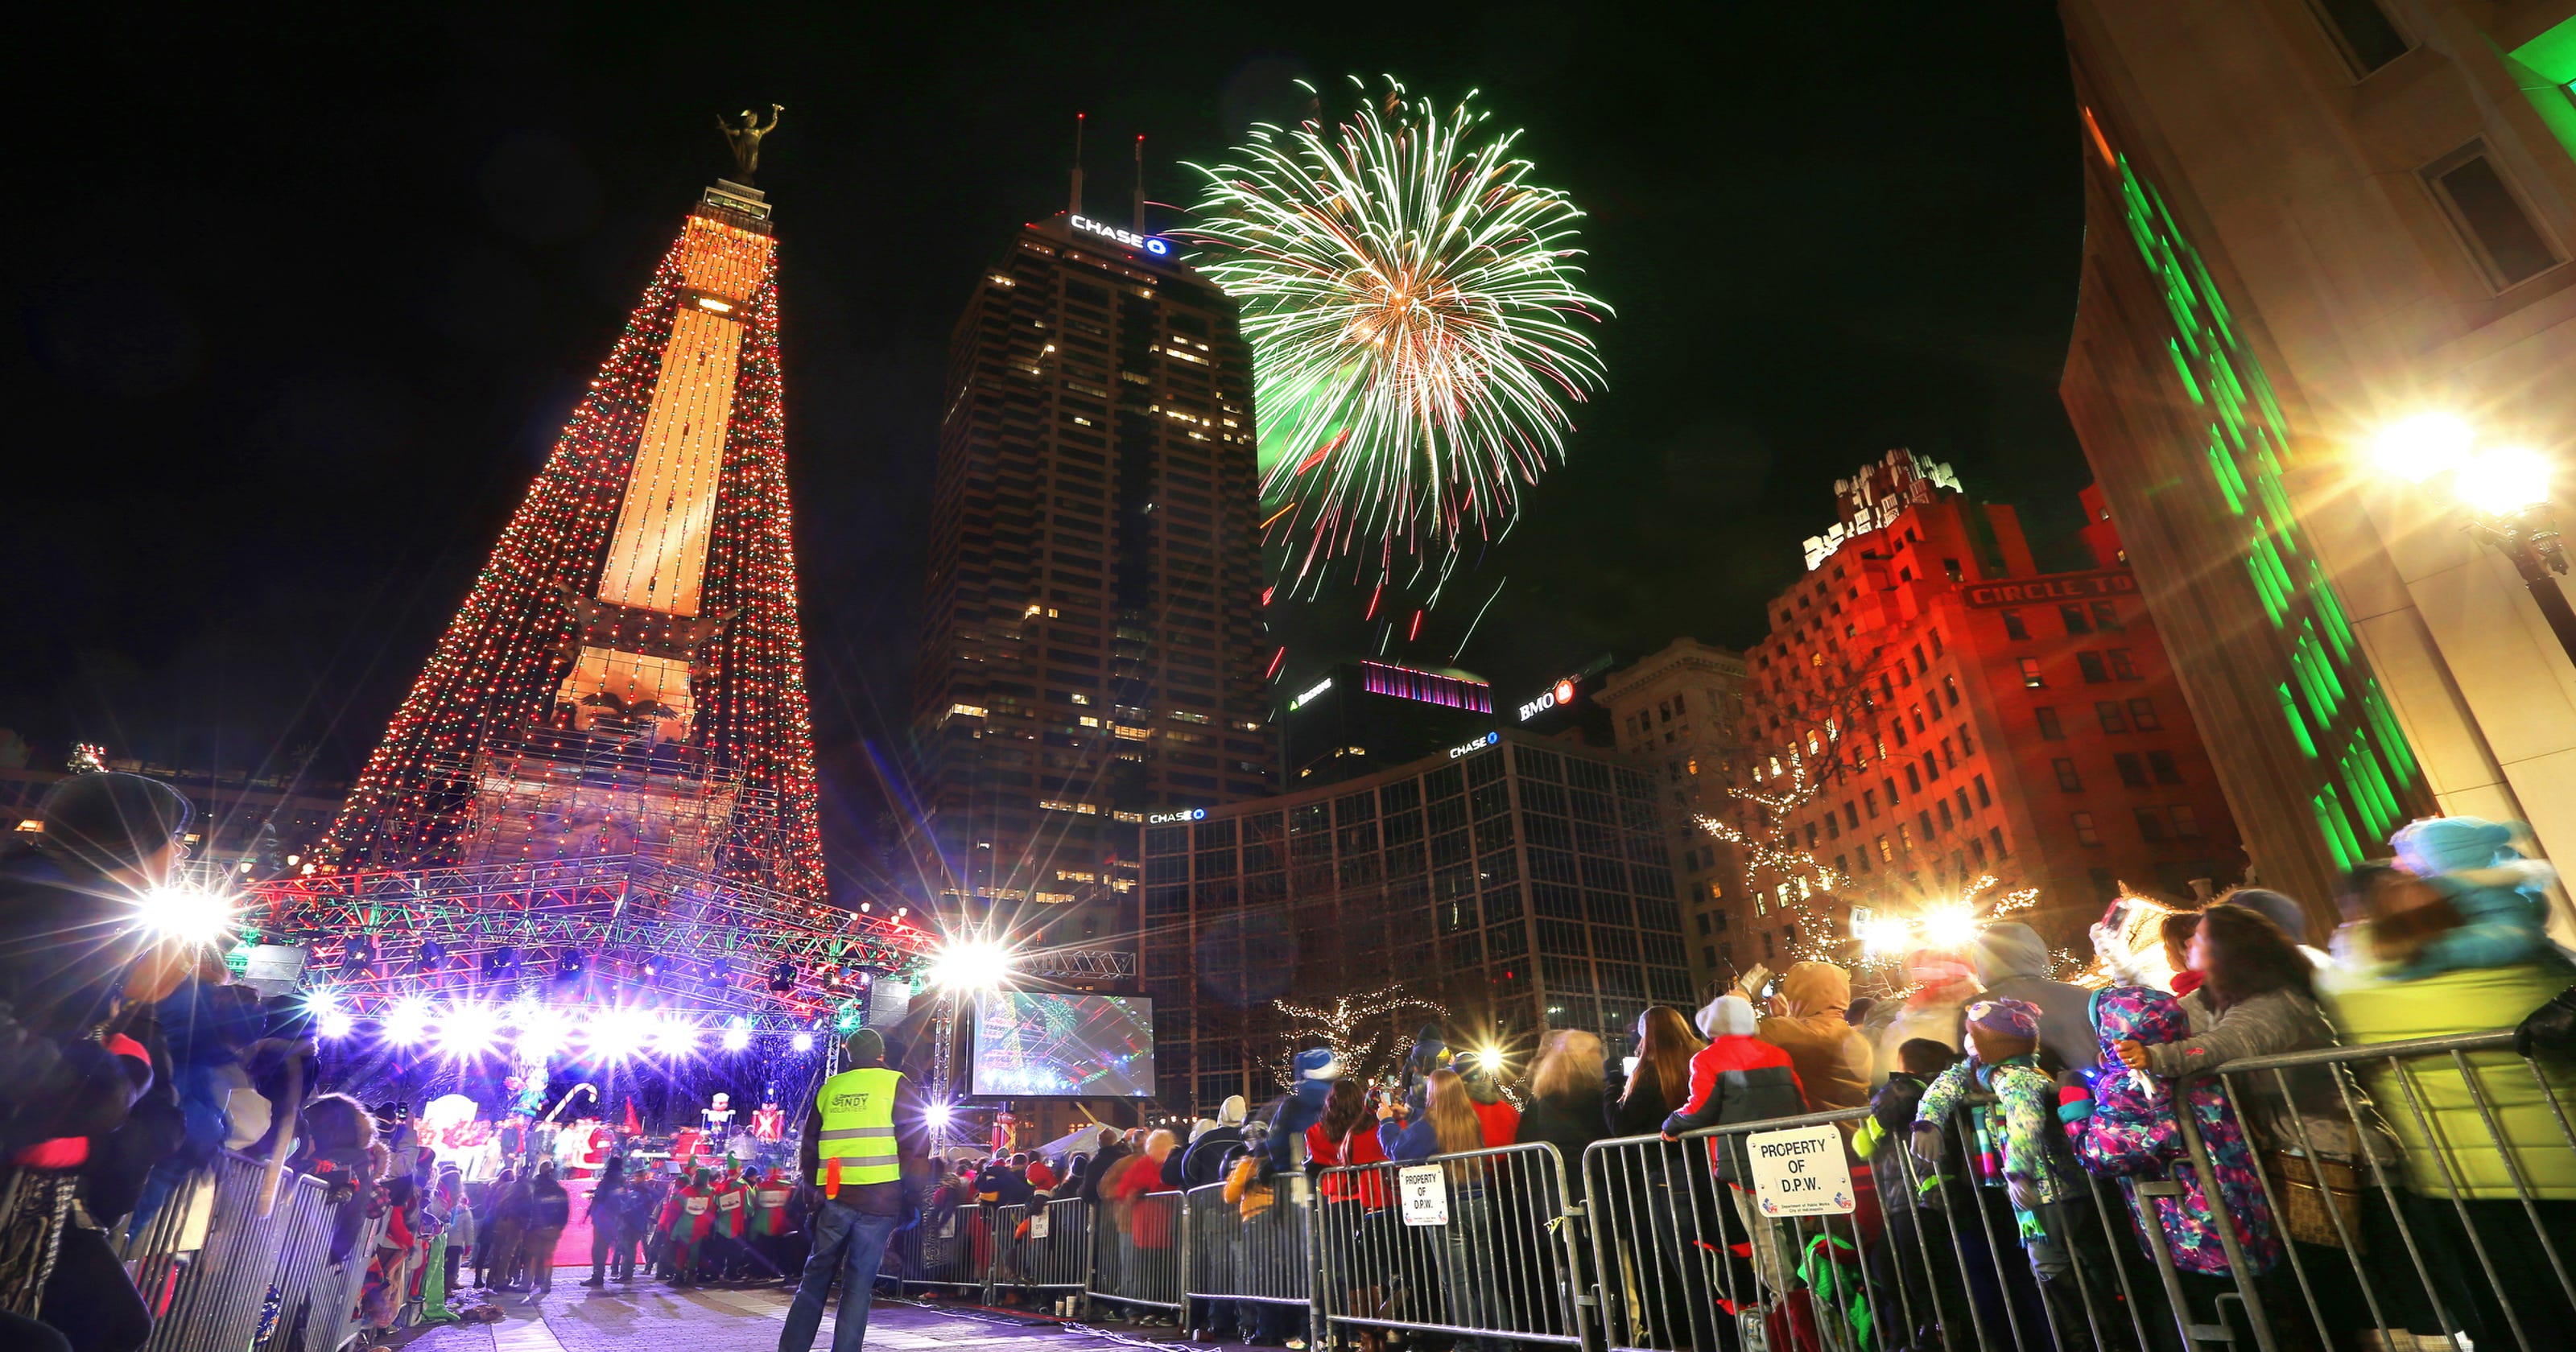 Old traditions and new 22 mustdo Indy holiday events